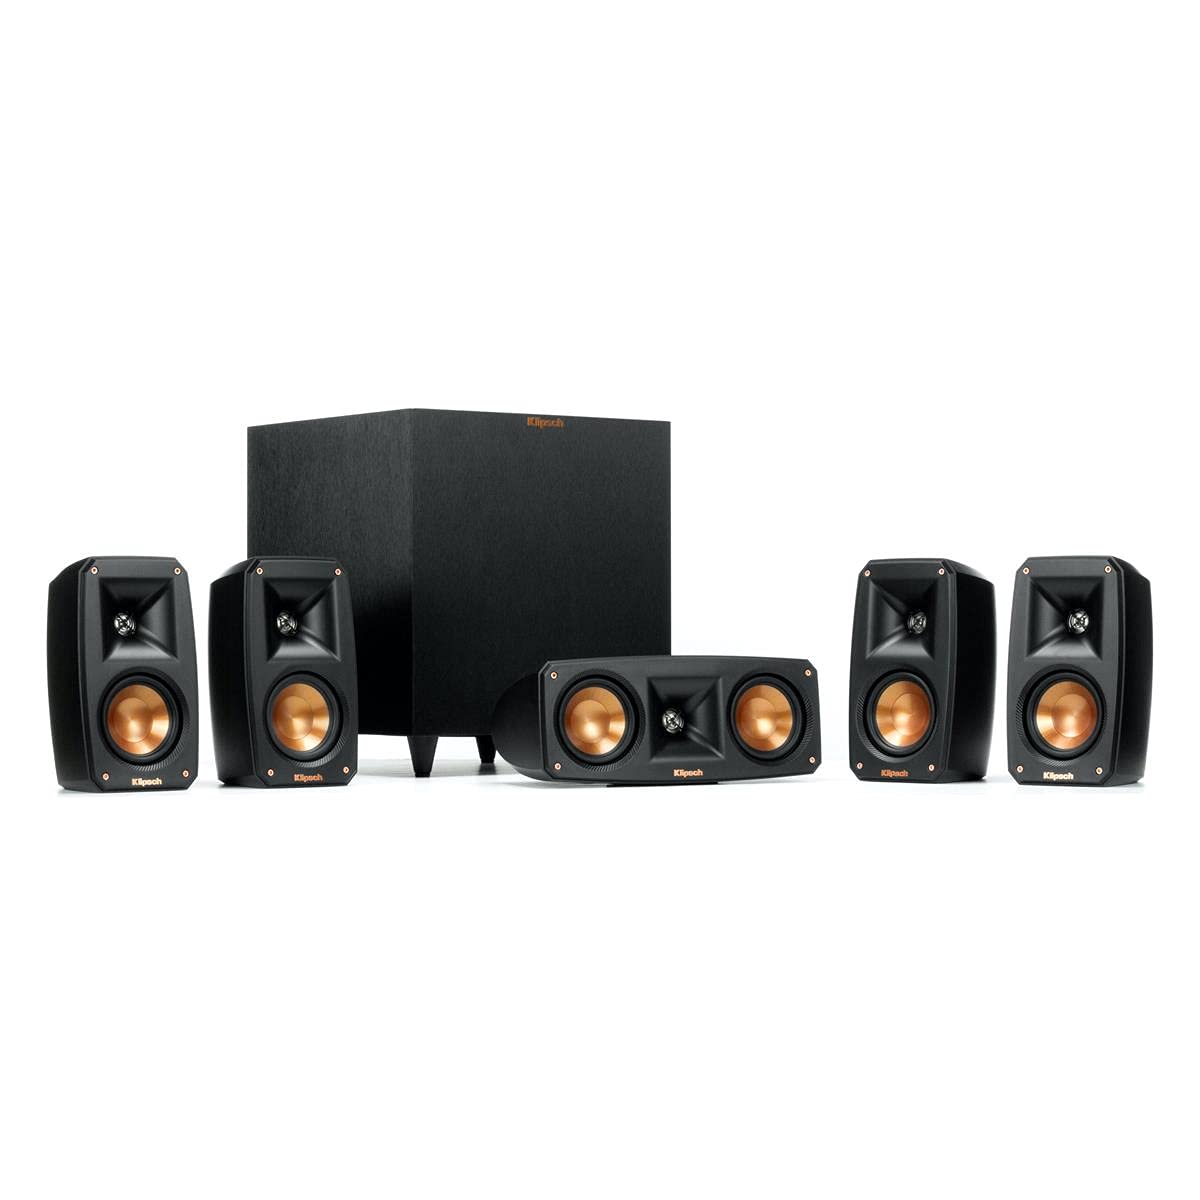 Klipsch Black Reference Theater Pack 5.1 Surround Sound System, Bundle with Onkyo TX-NR696 7.2-Channel Network A/V Receiver, 210W Per Channel (at 6 Ohms)